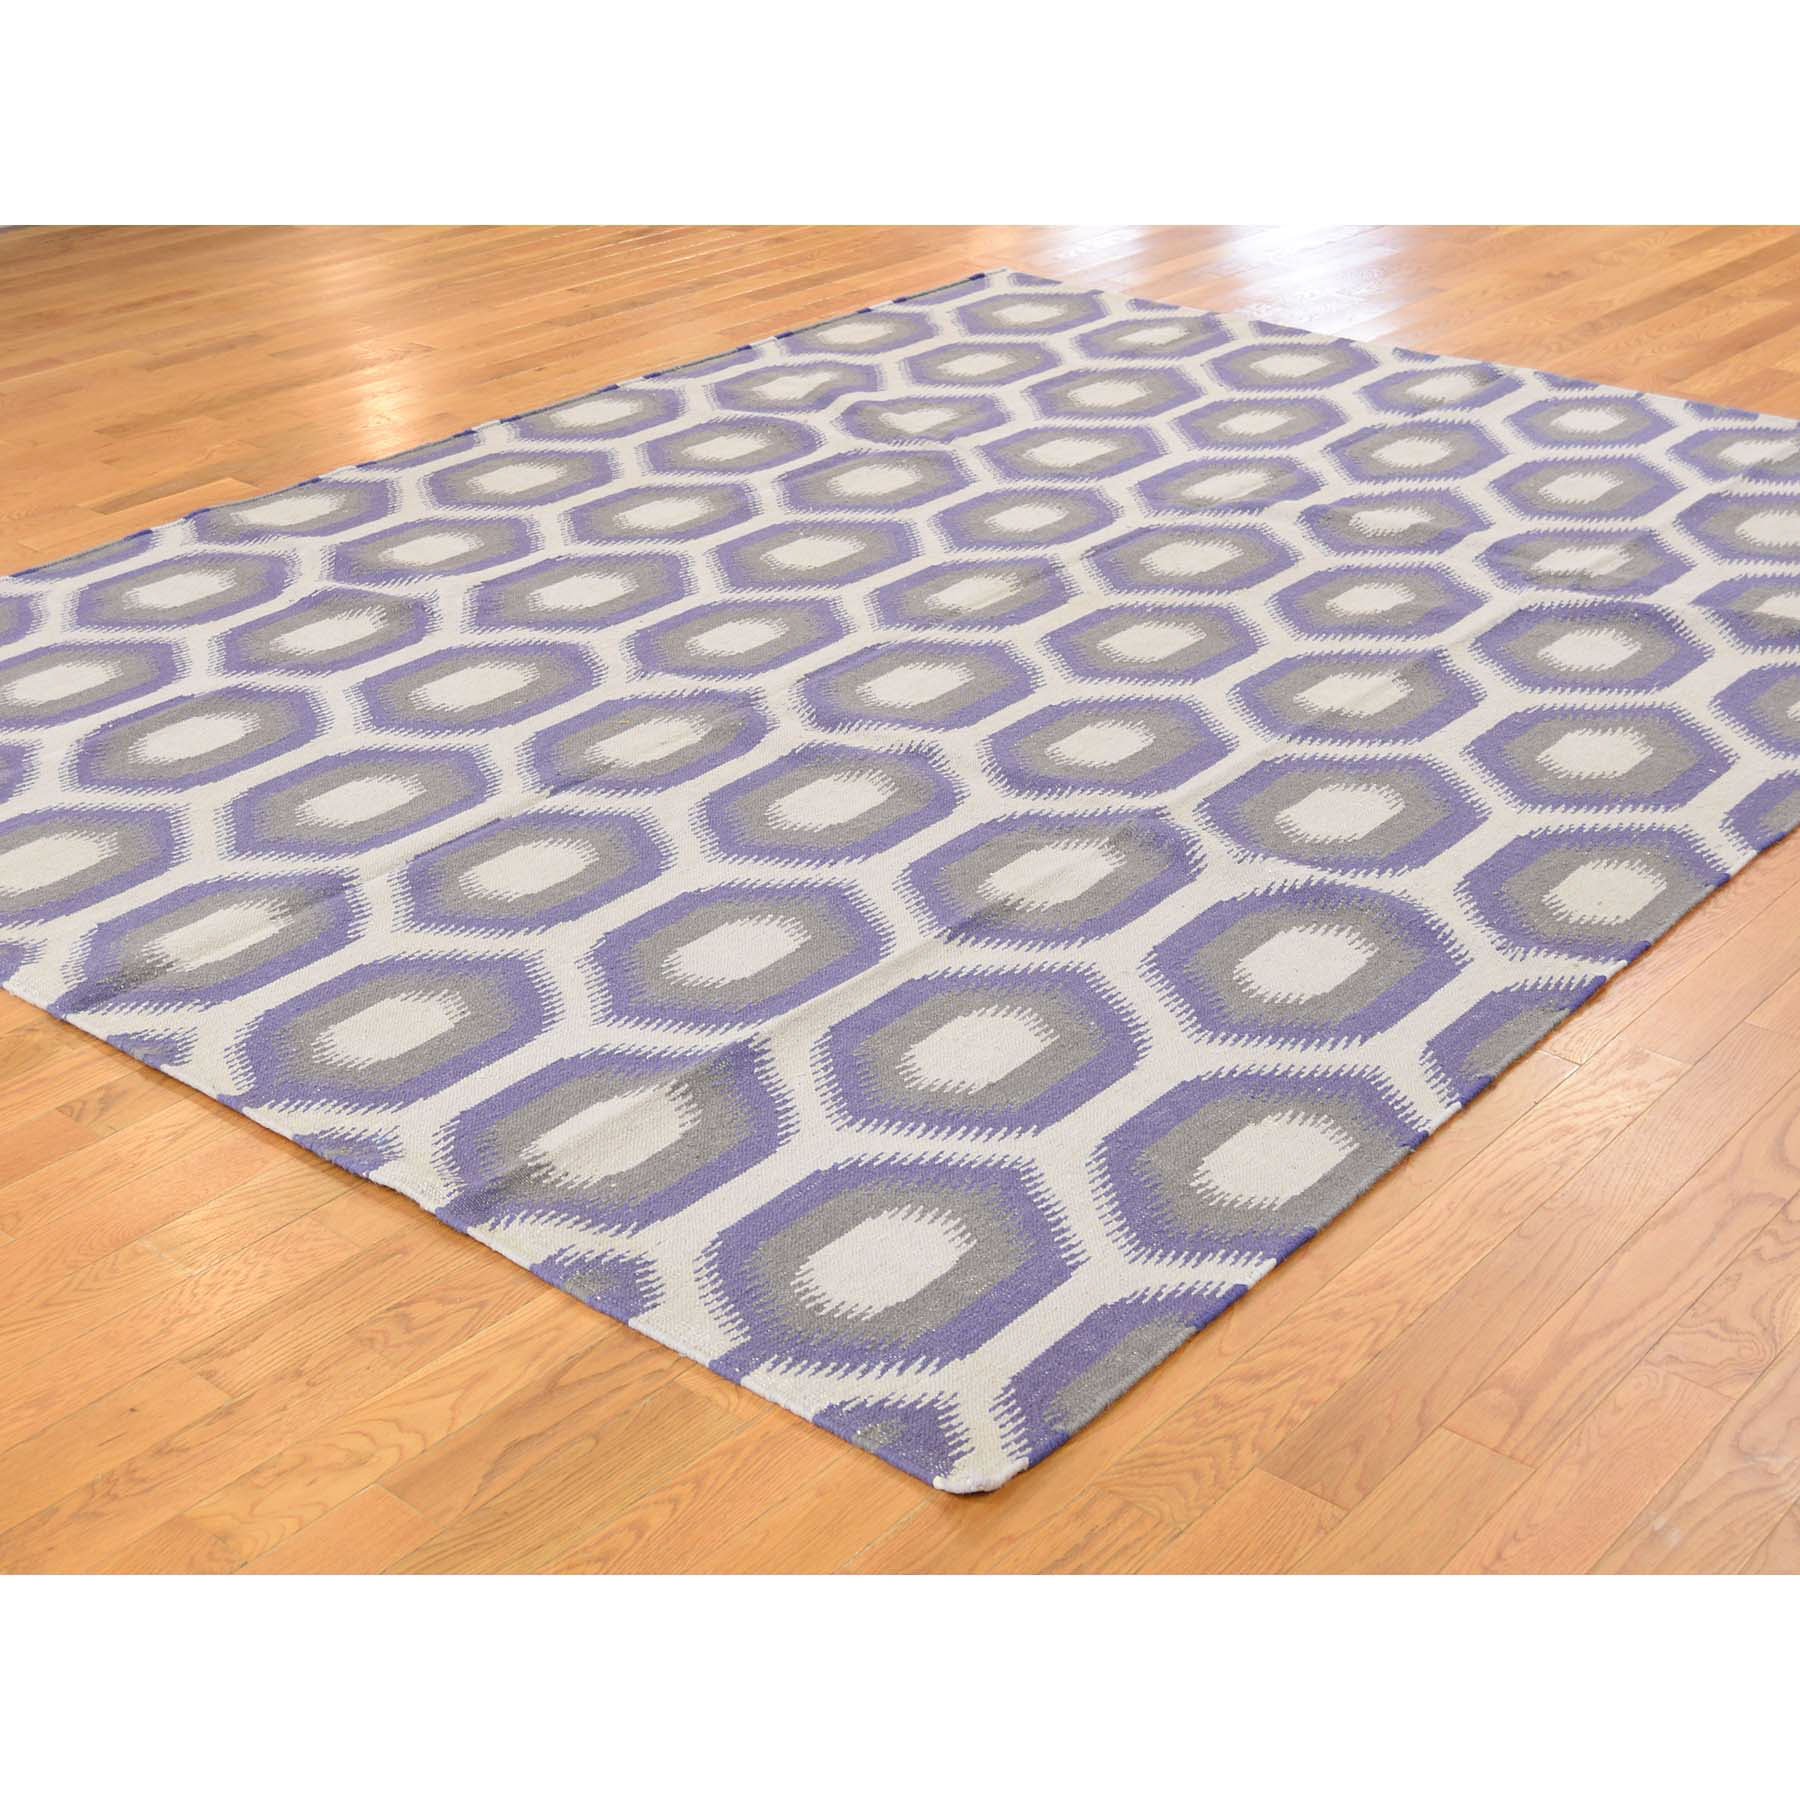 8'10''x12'2'' Durie Kilim Flat Weave Hand Woven Reversible Pure Wool Rug 